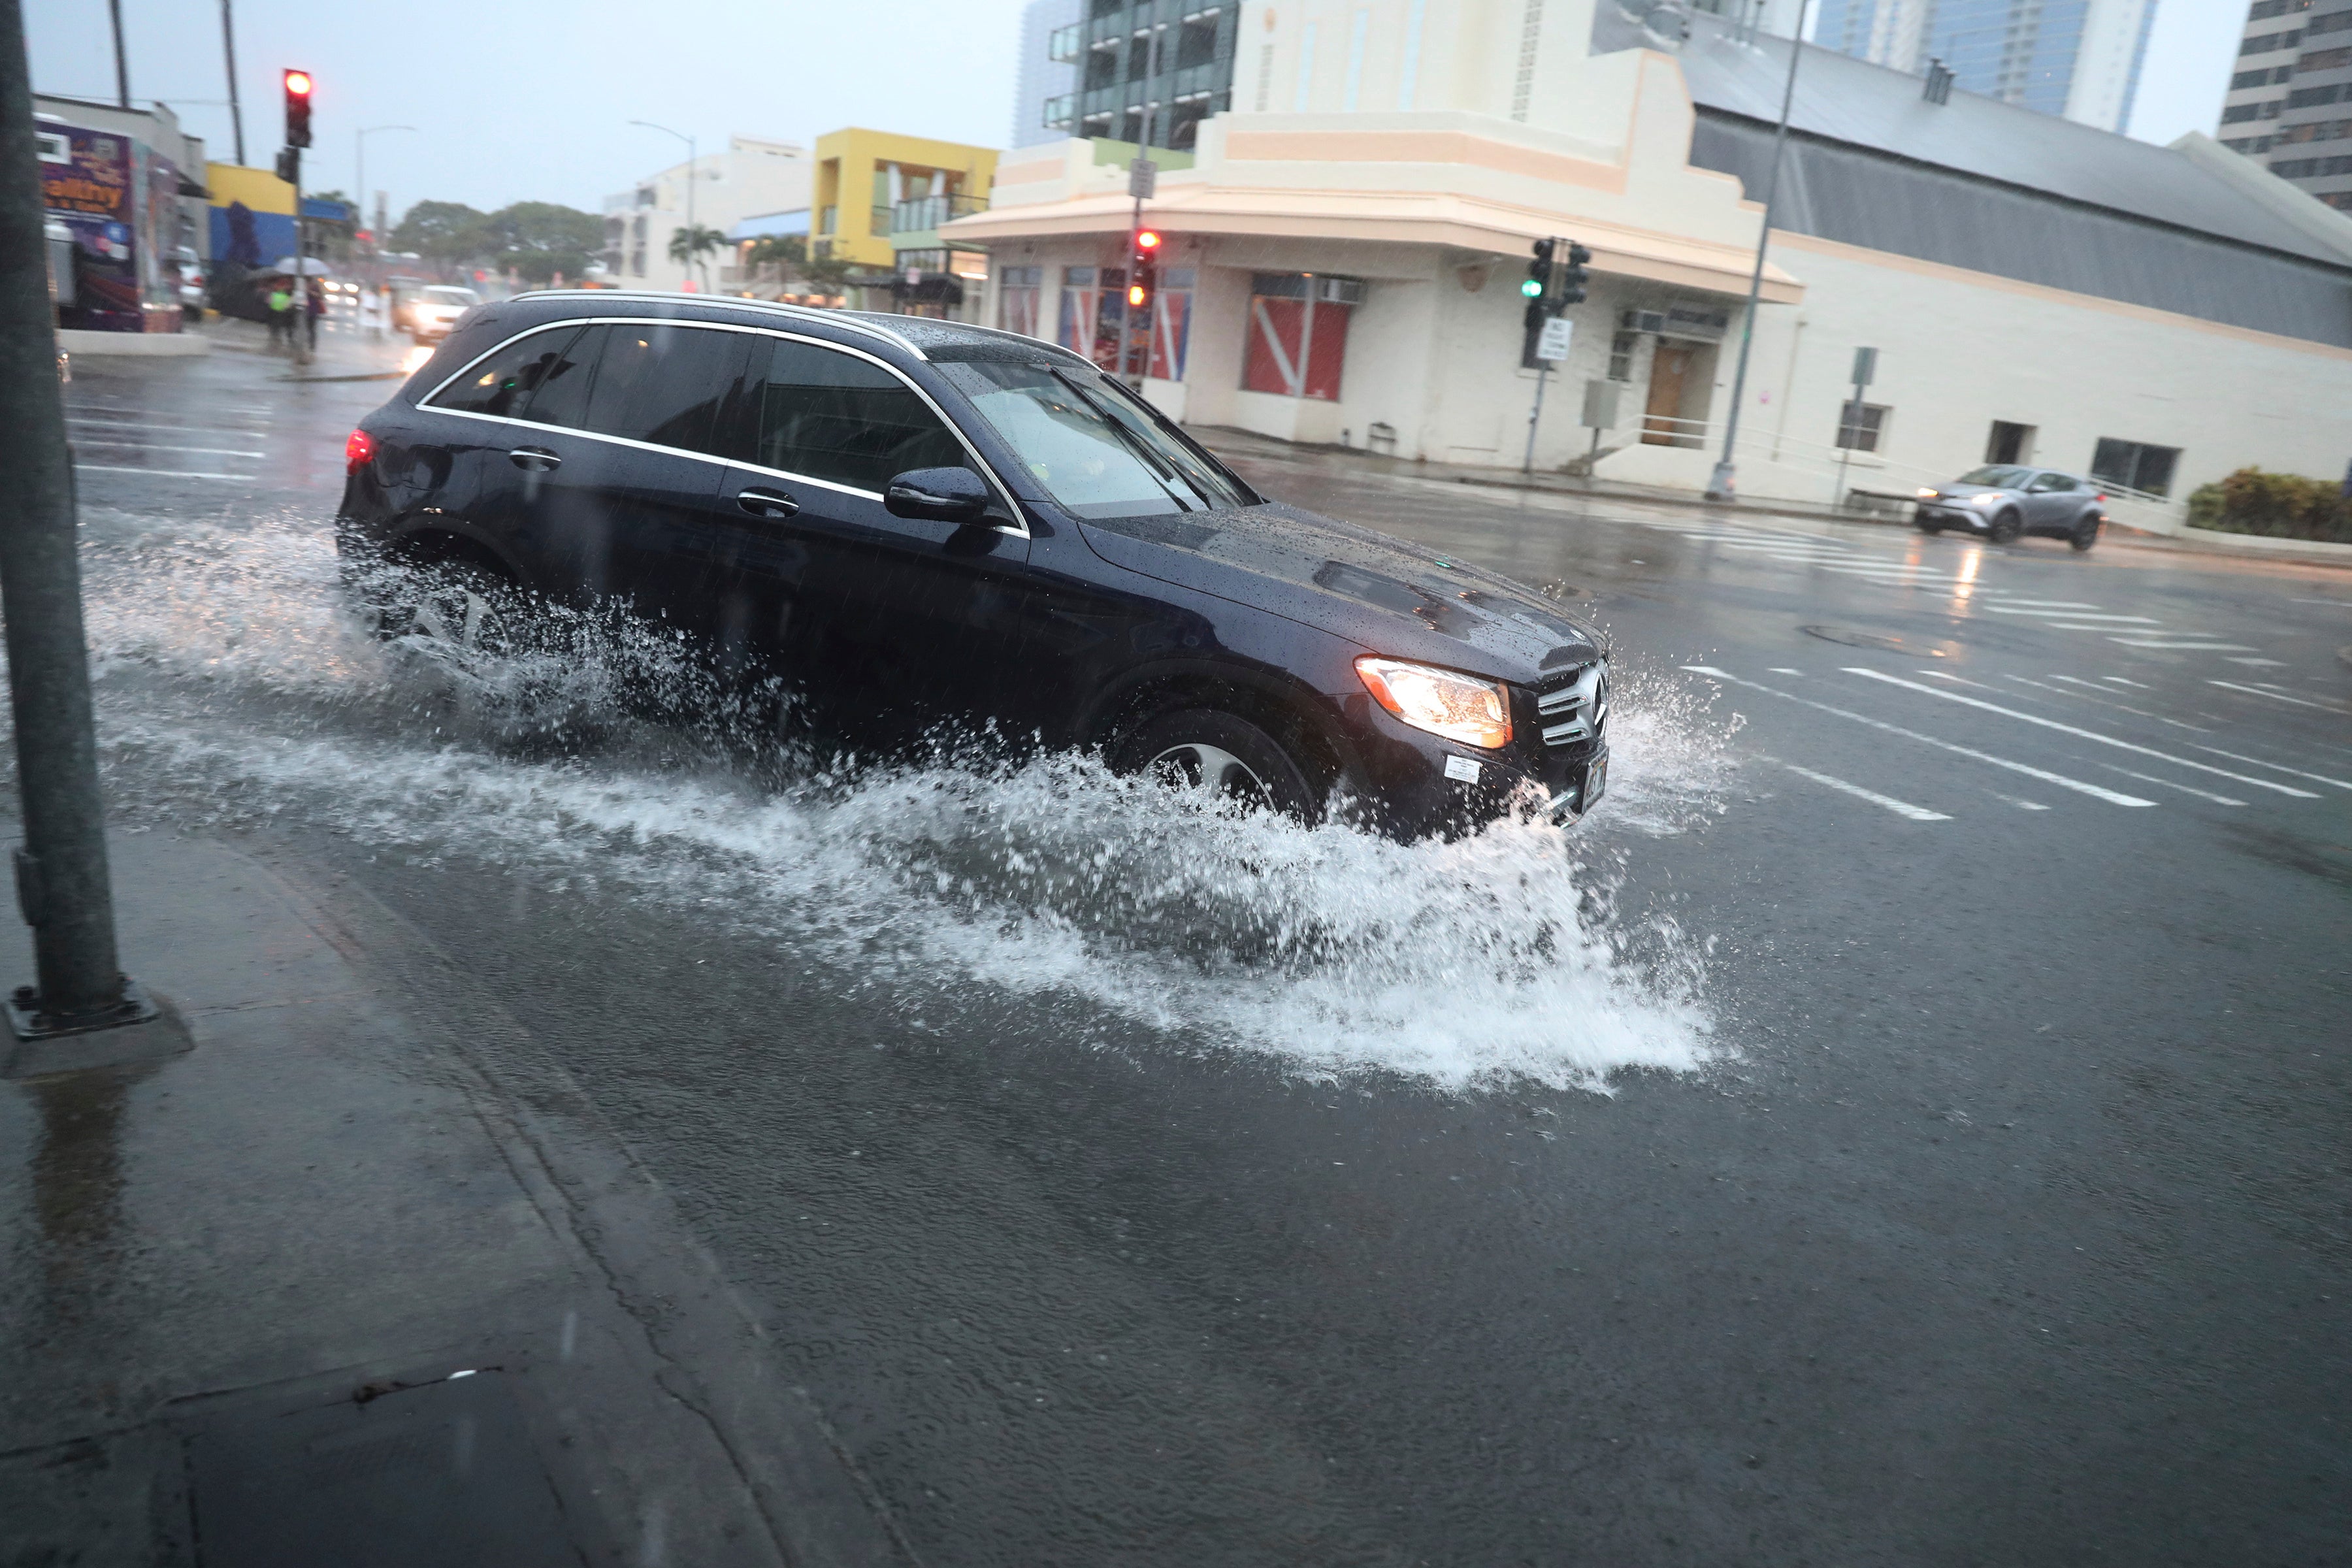 A car turns onto a flooded street on Monday, December 6 in Honolulu